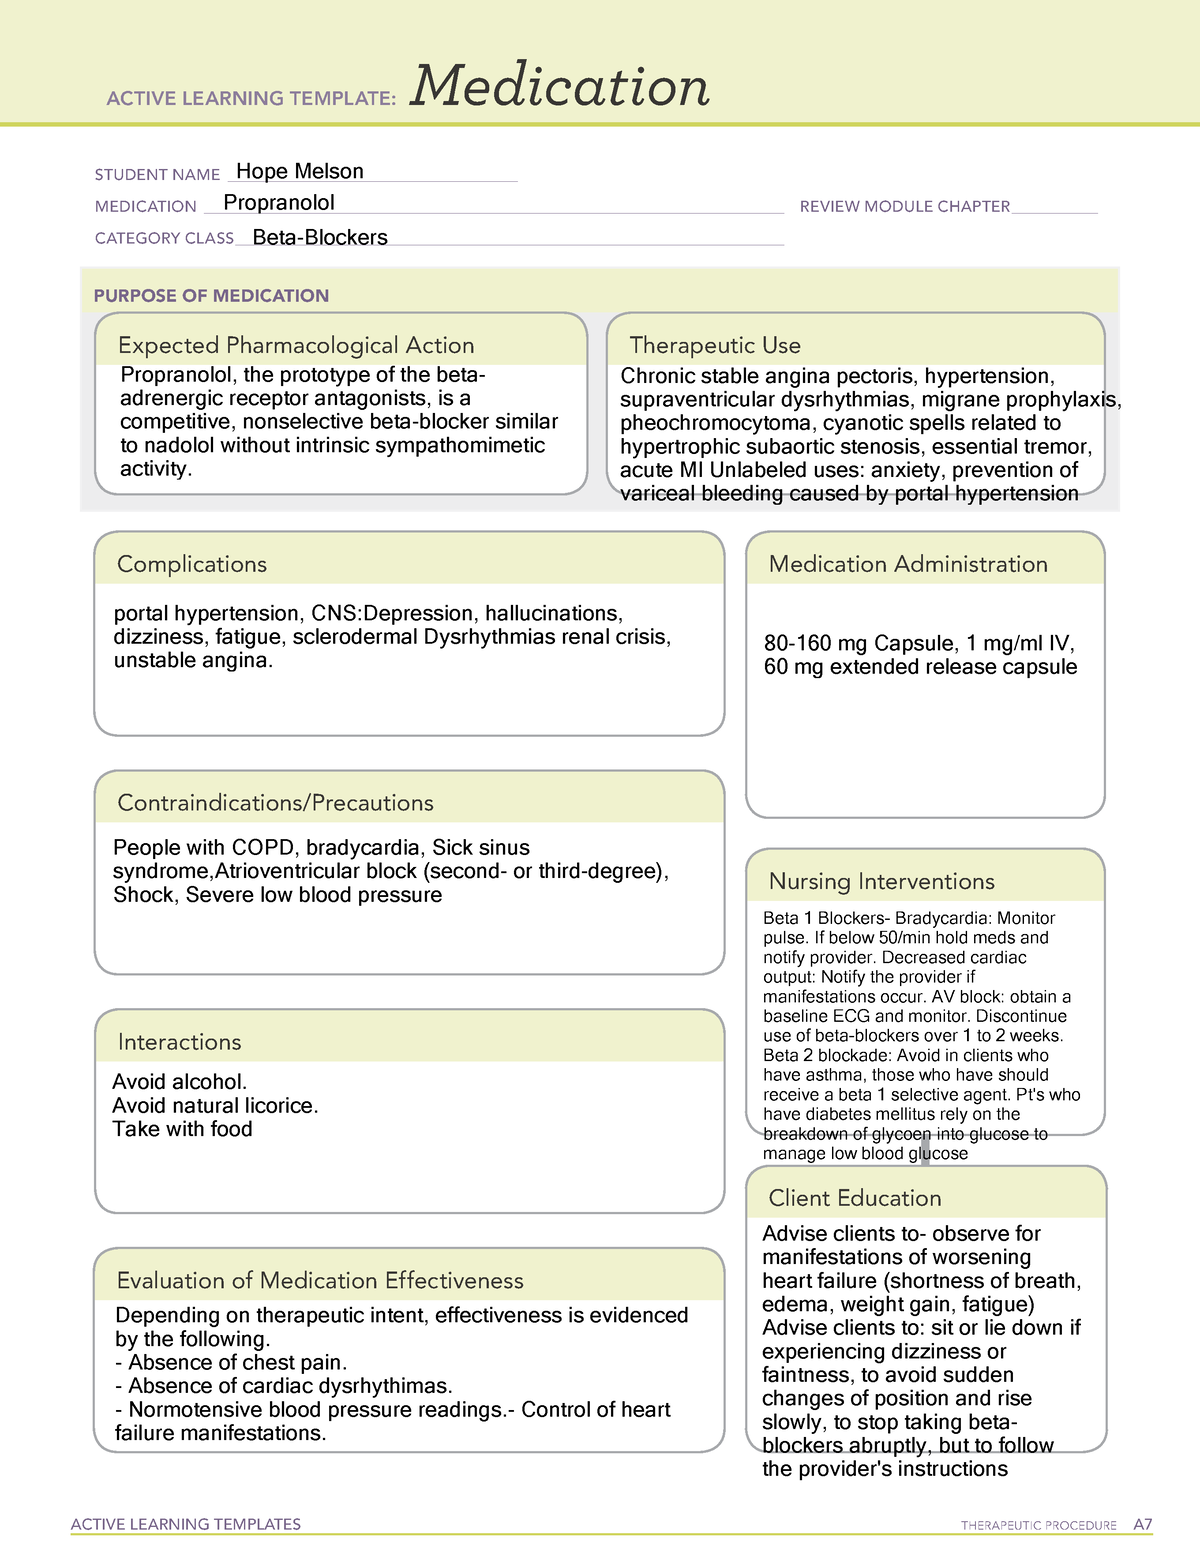 2022 ATI Medication Template PROPRANOLOL ACTIVE LEARNING TEMPLATES